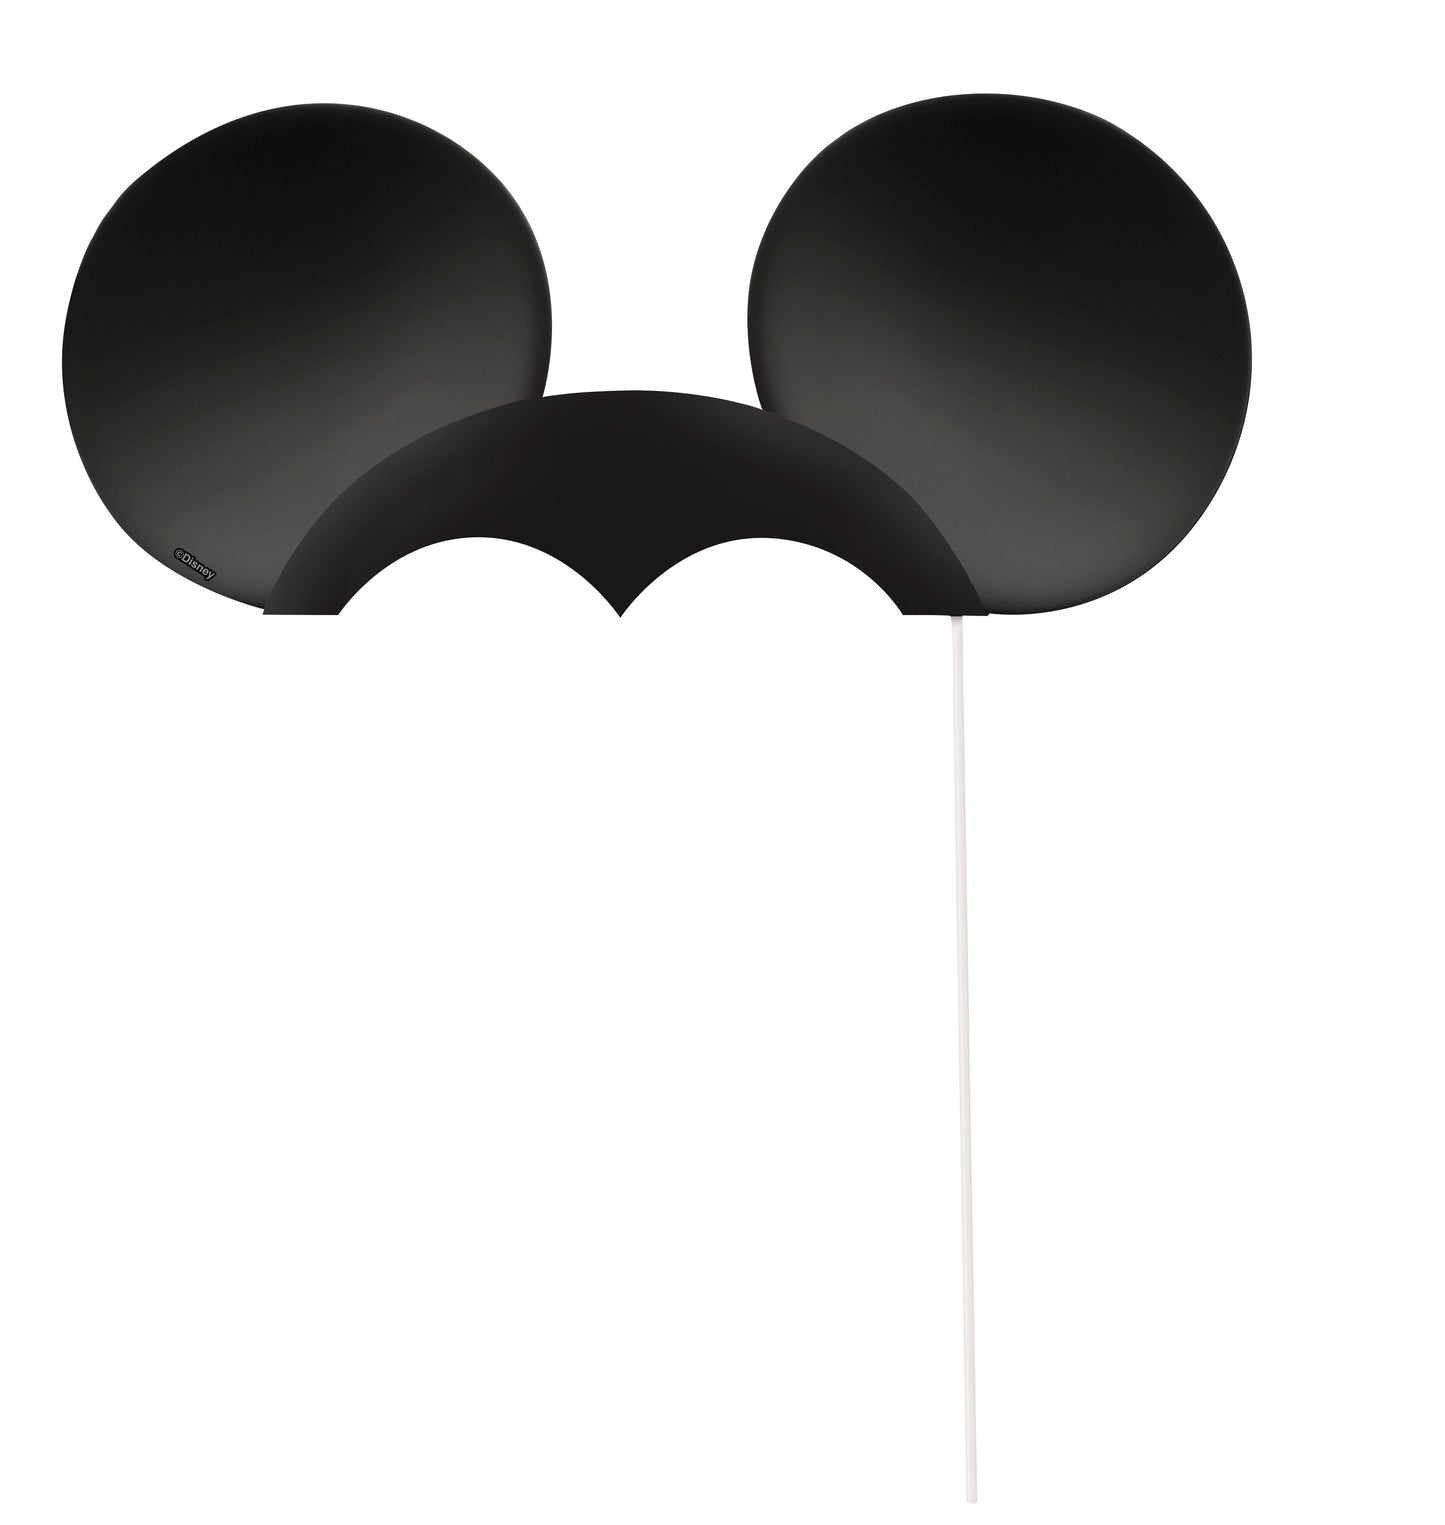 Disney Mickey Mouse Photo Booth Props, 8-pc